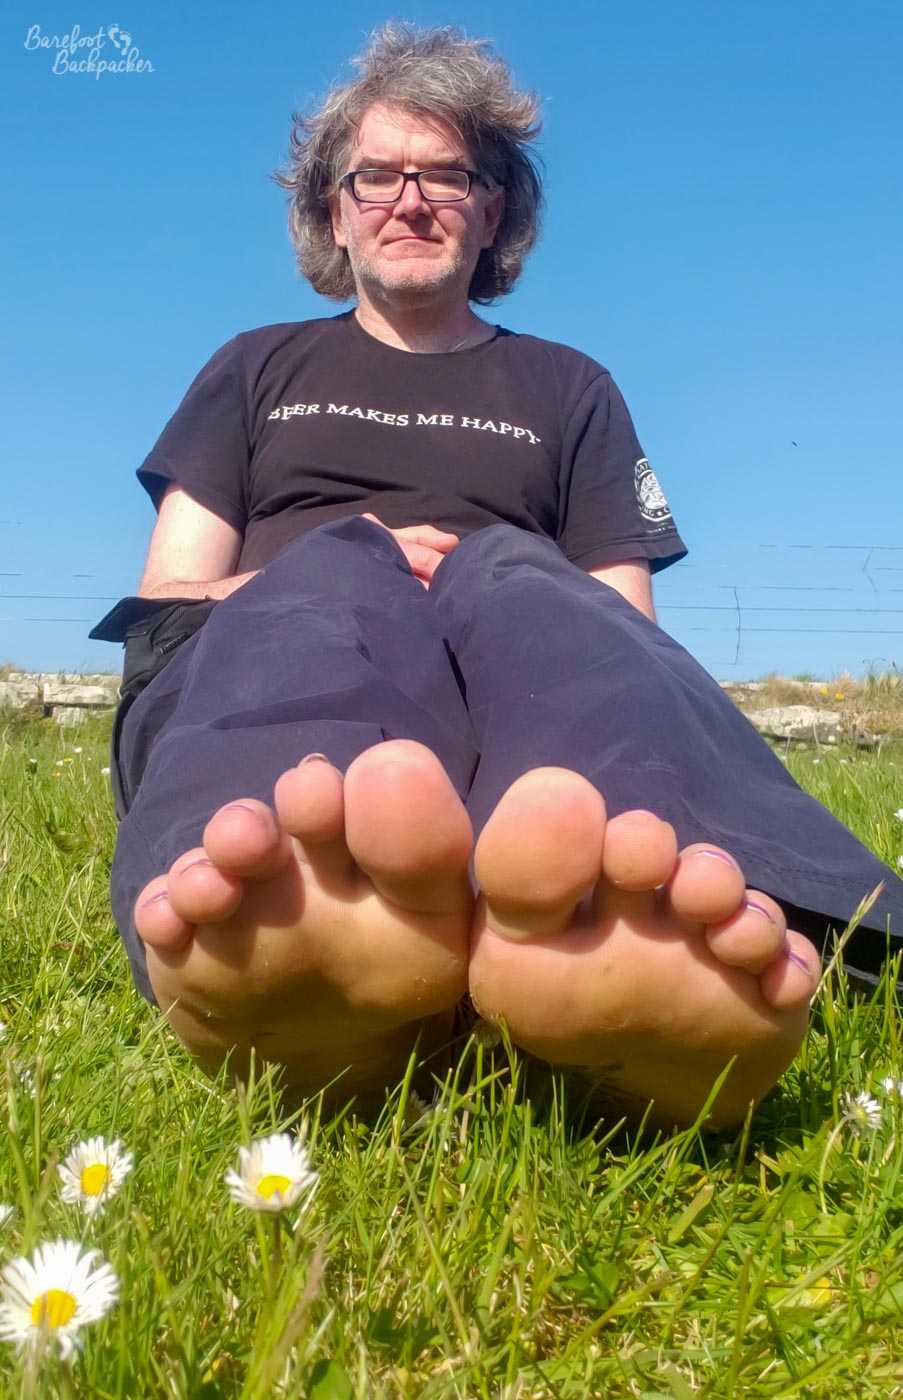 A man (well, an AMAB enby, anyway) is sitting on the grass on a bright sunny day. They are barefoot, and their toes are pointed towards the camera in the foreground, just next to a couple of daisies.